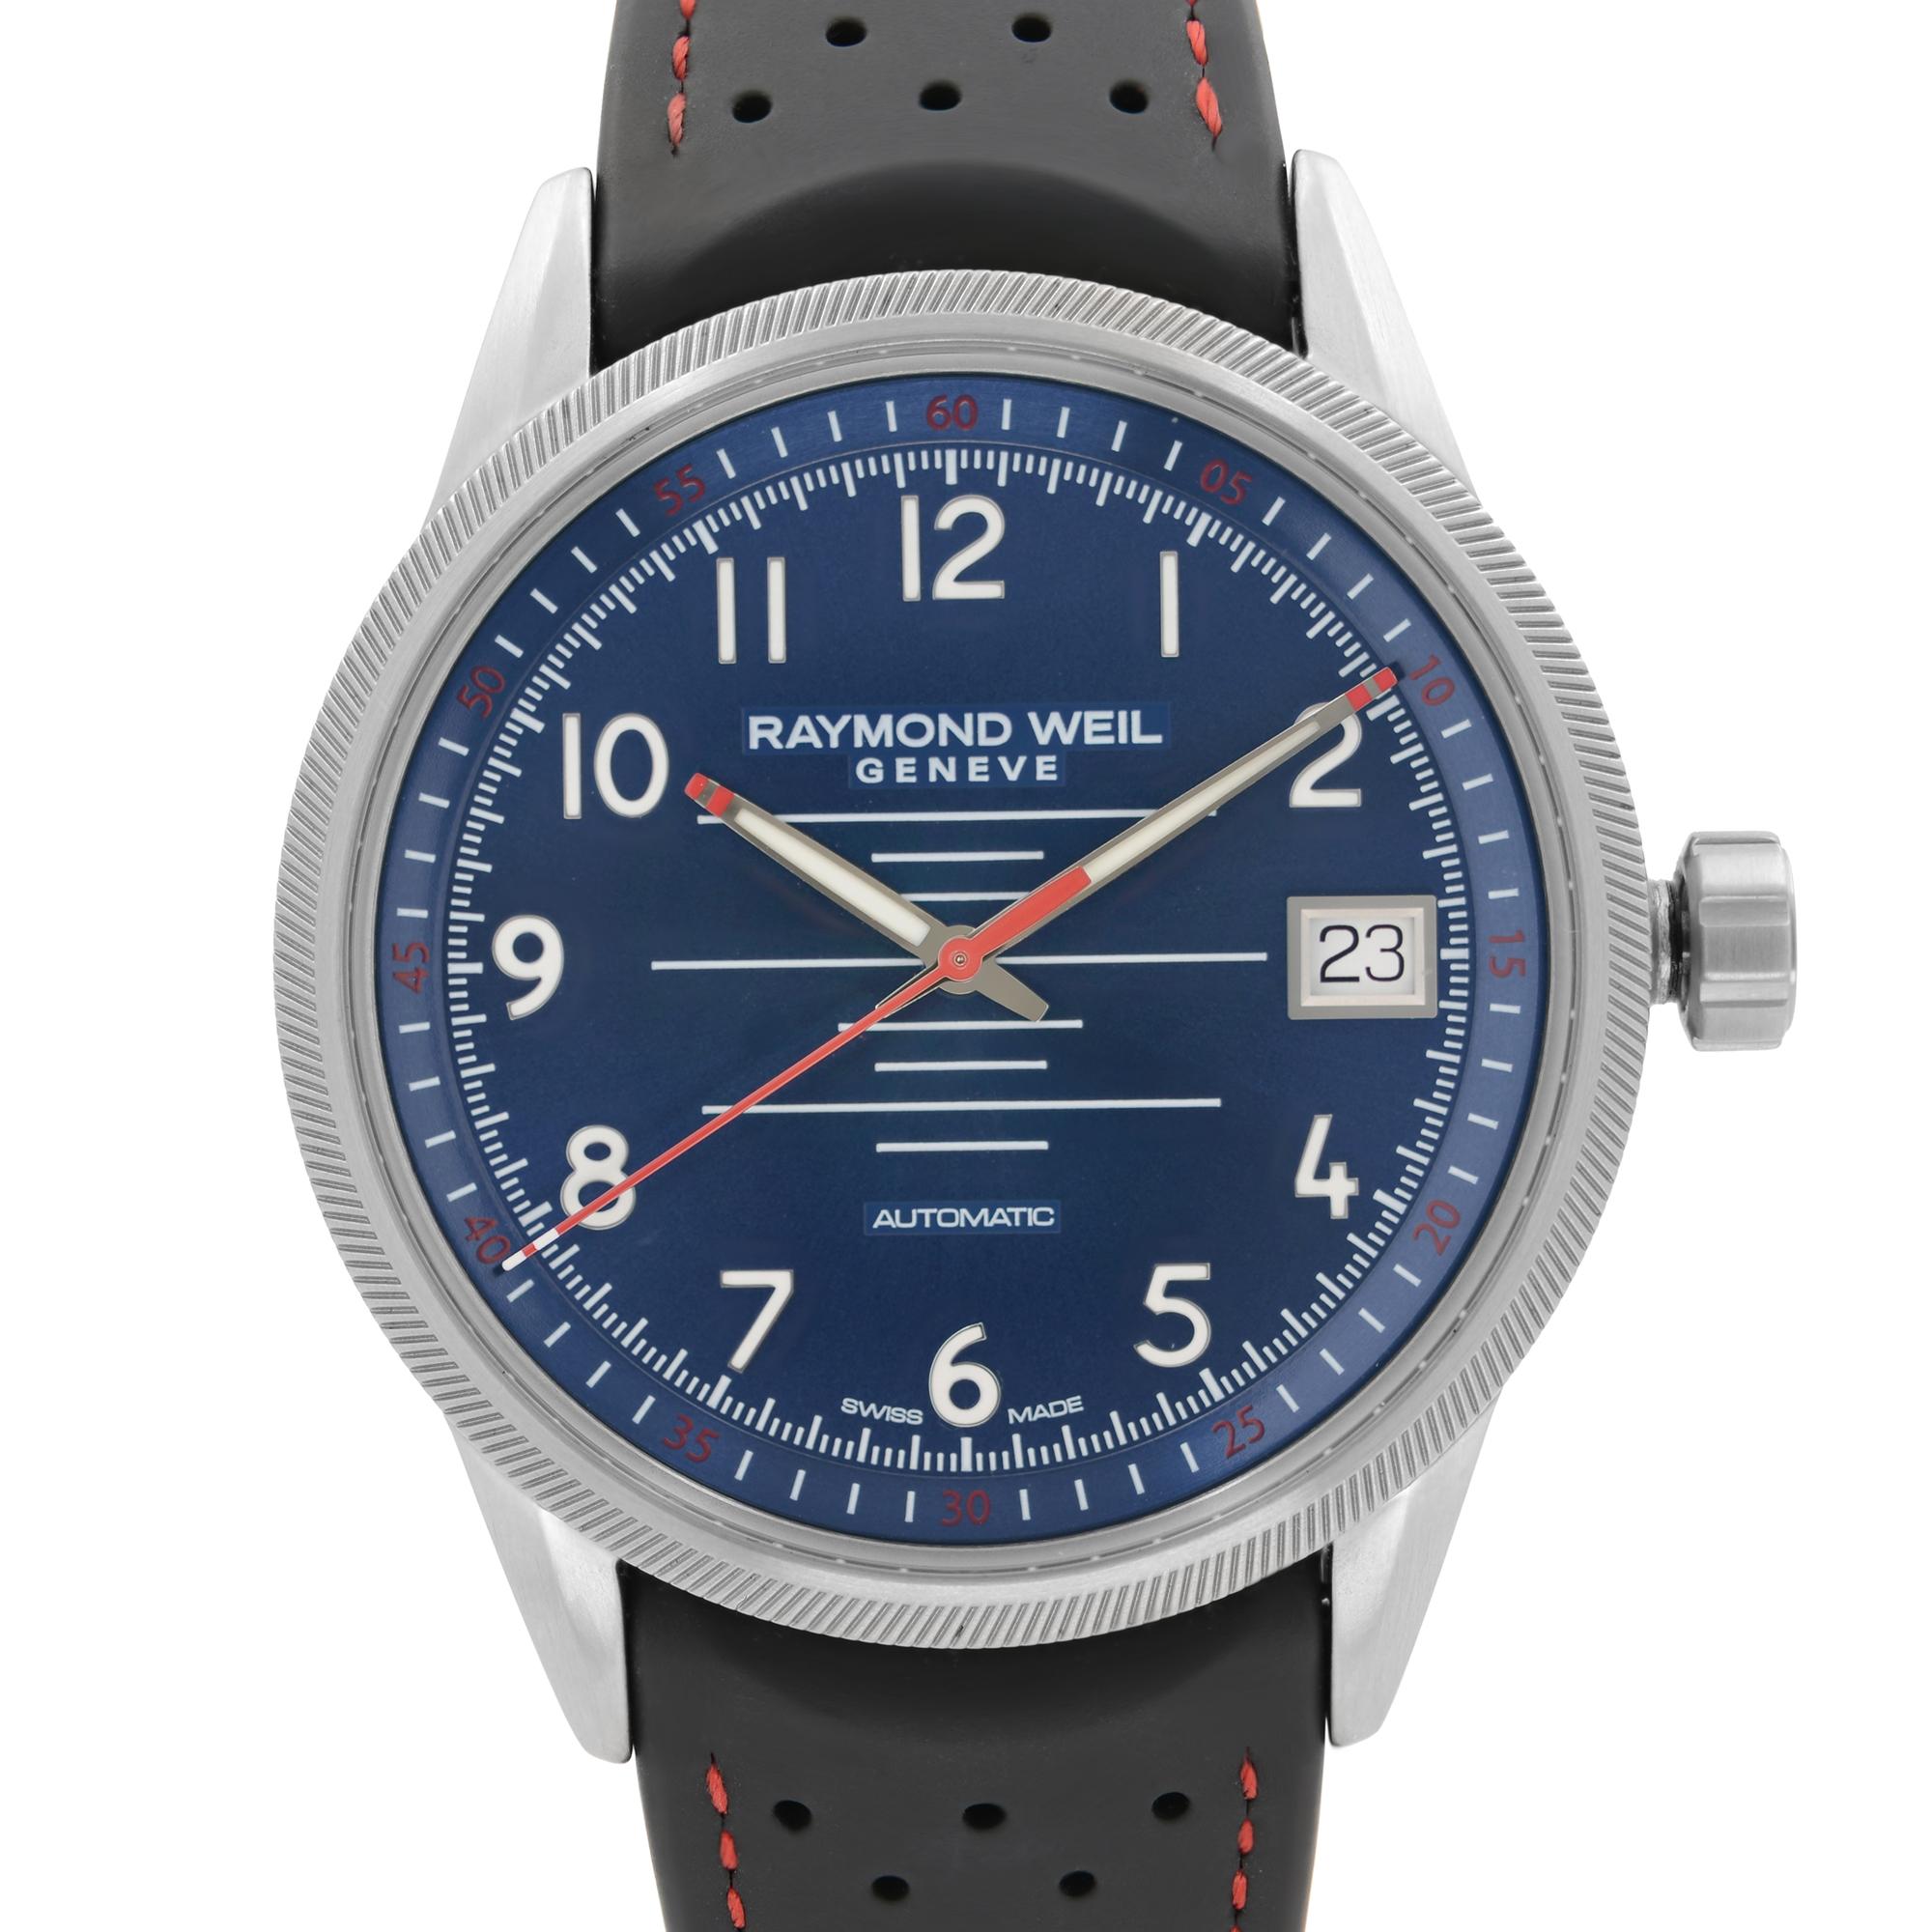 Never Worn Raymond Weil Freelancer 42mm Steel Blue Dial Automatic Men's Watch 2754-SR-05500. This Beautiful Timepiece Features: Stainless Steel Case with a Black Rubber Strap with Red Stitching, Fixed Stainless Steel Bezel, Blue Dial with Luminous